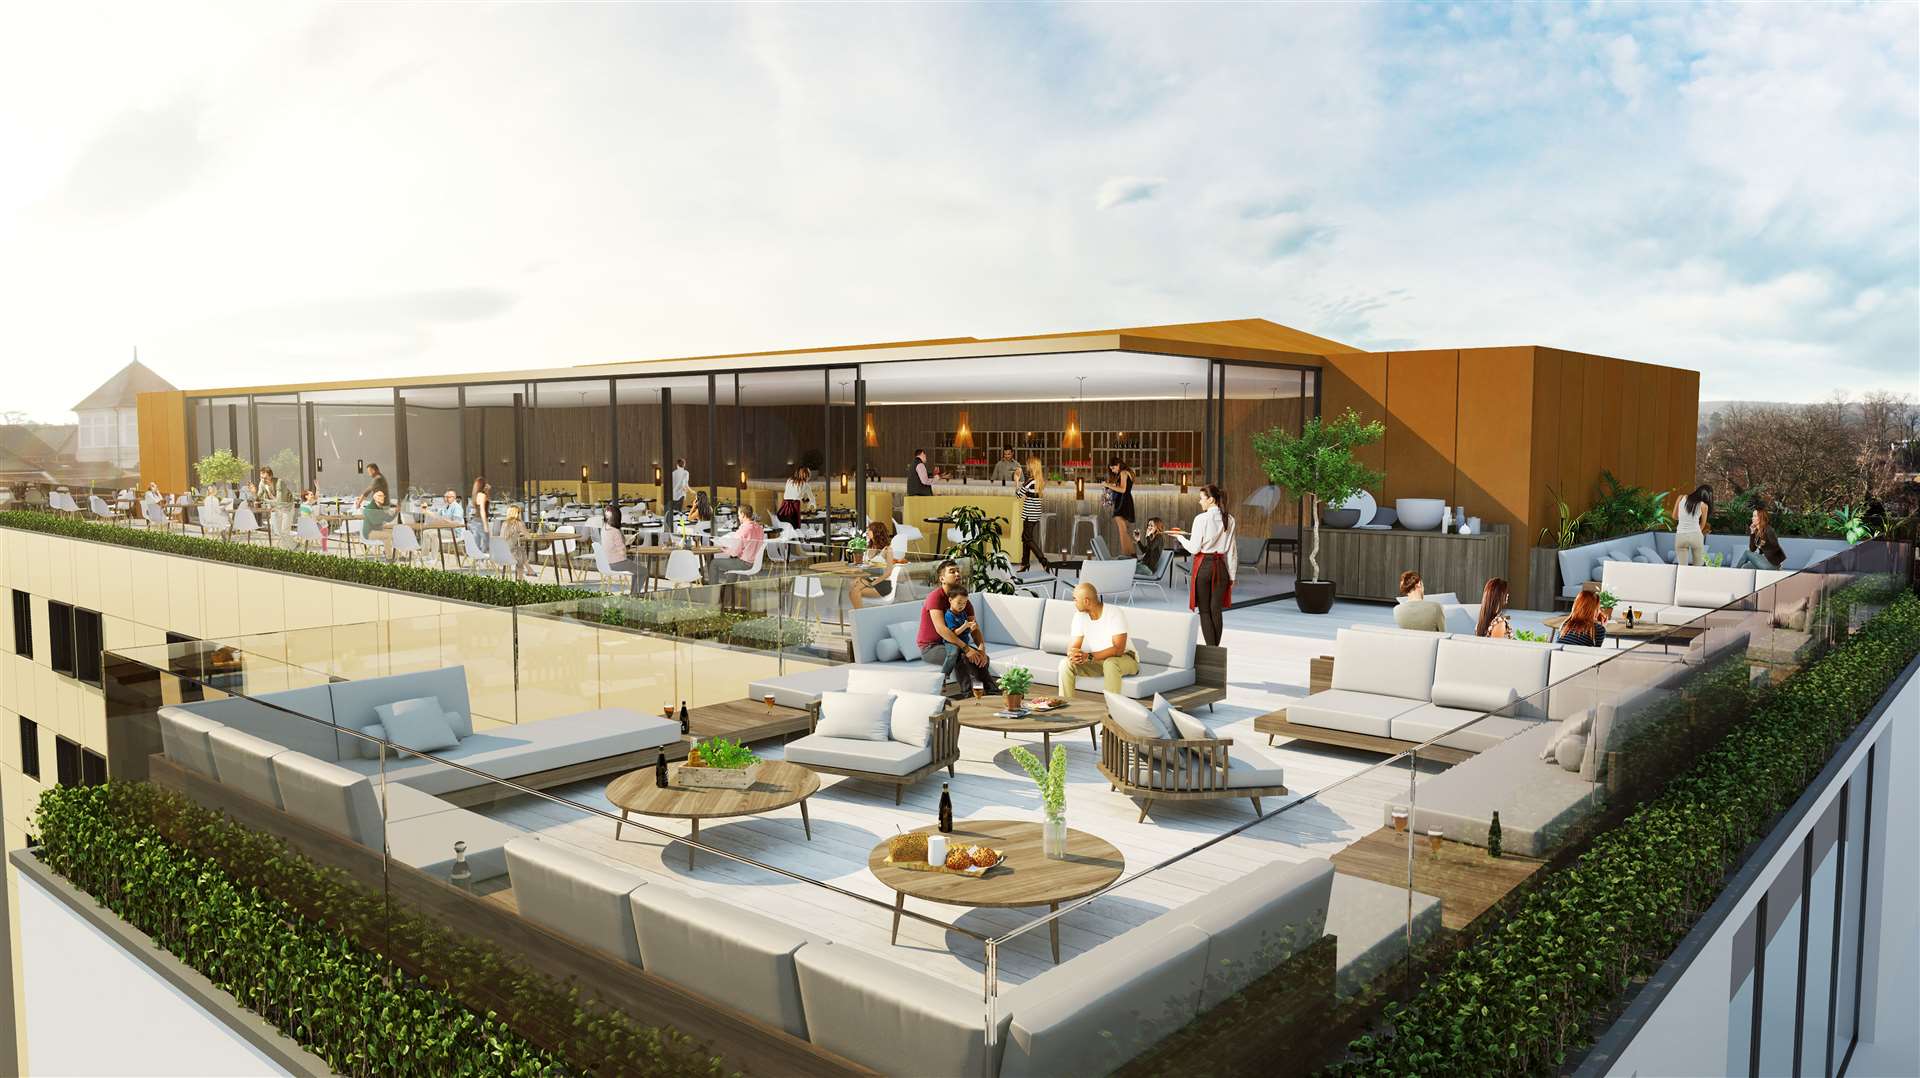 The Socialite rooftop restaurant is set to cater for more than 100 customers